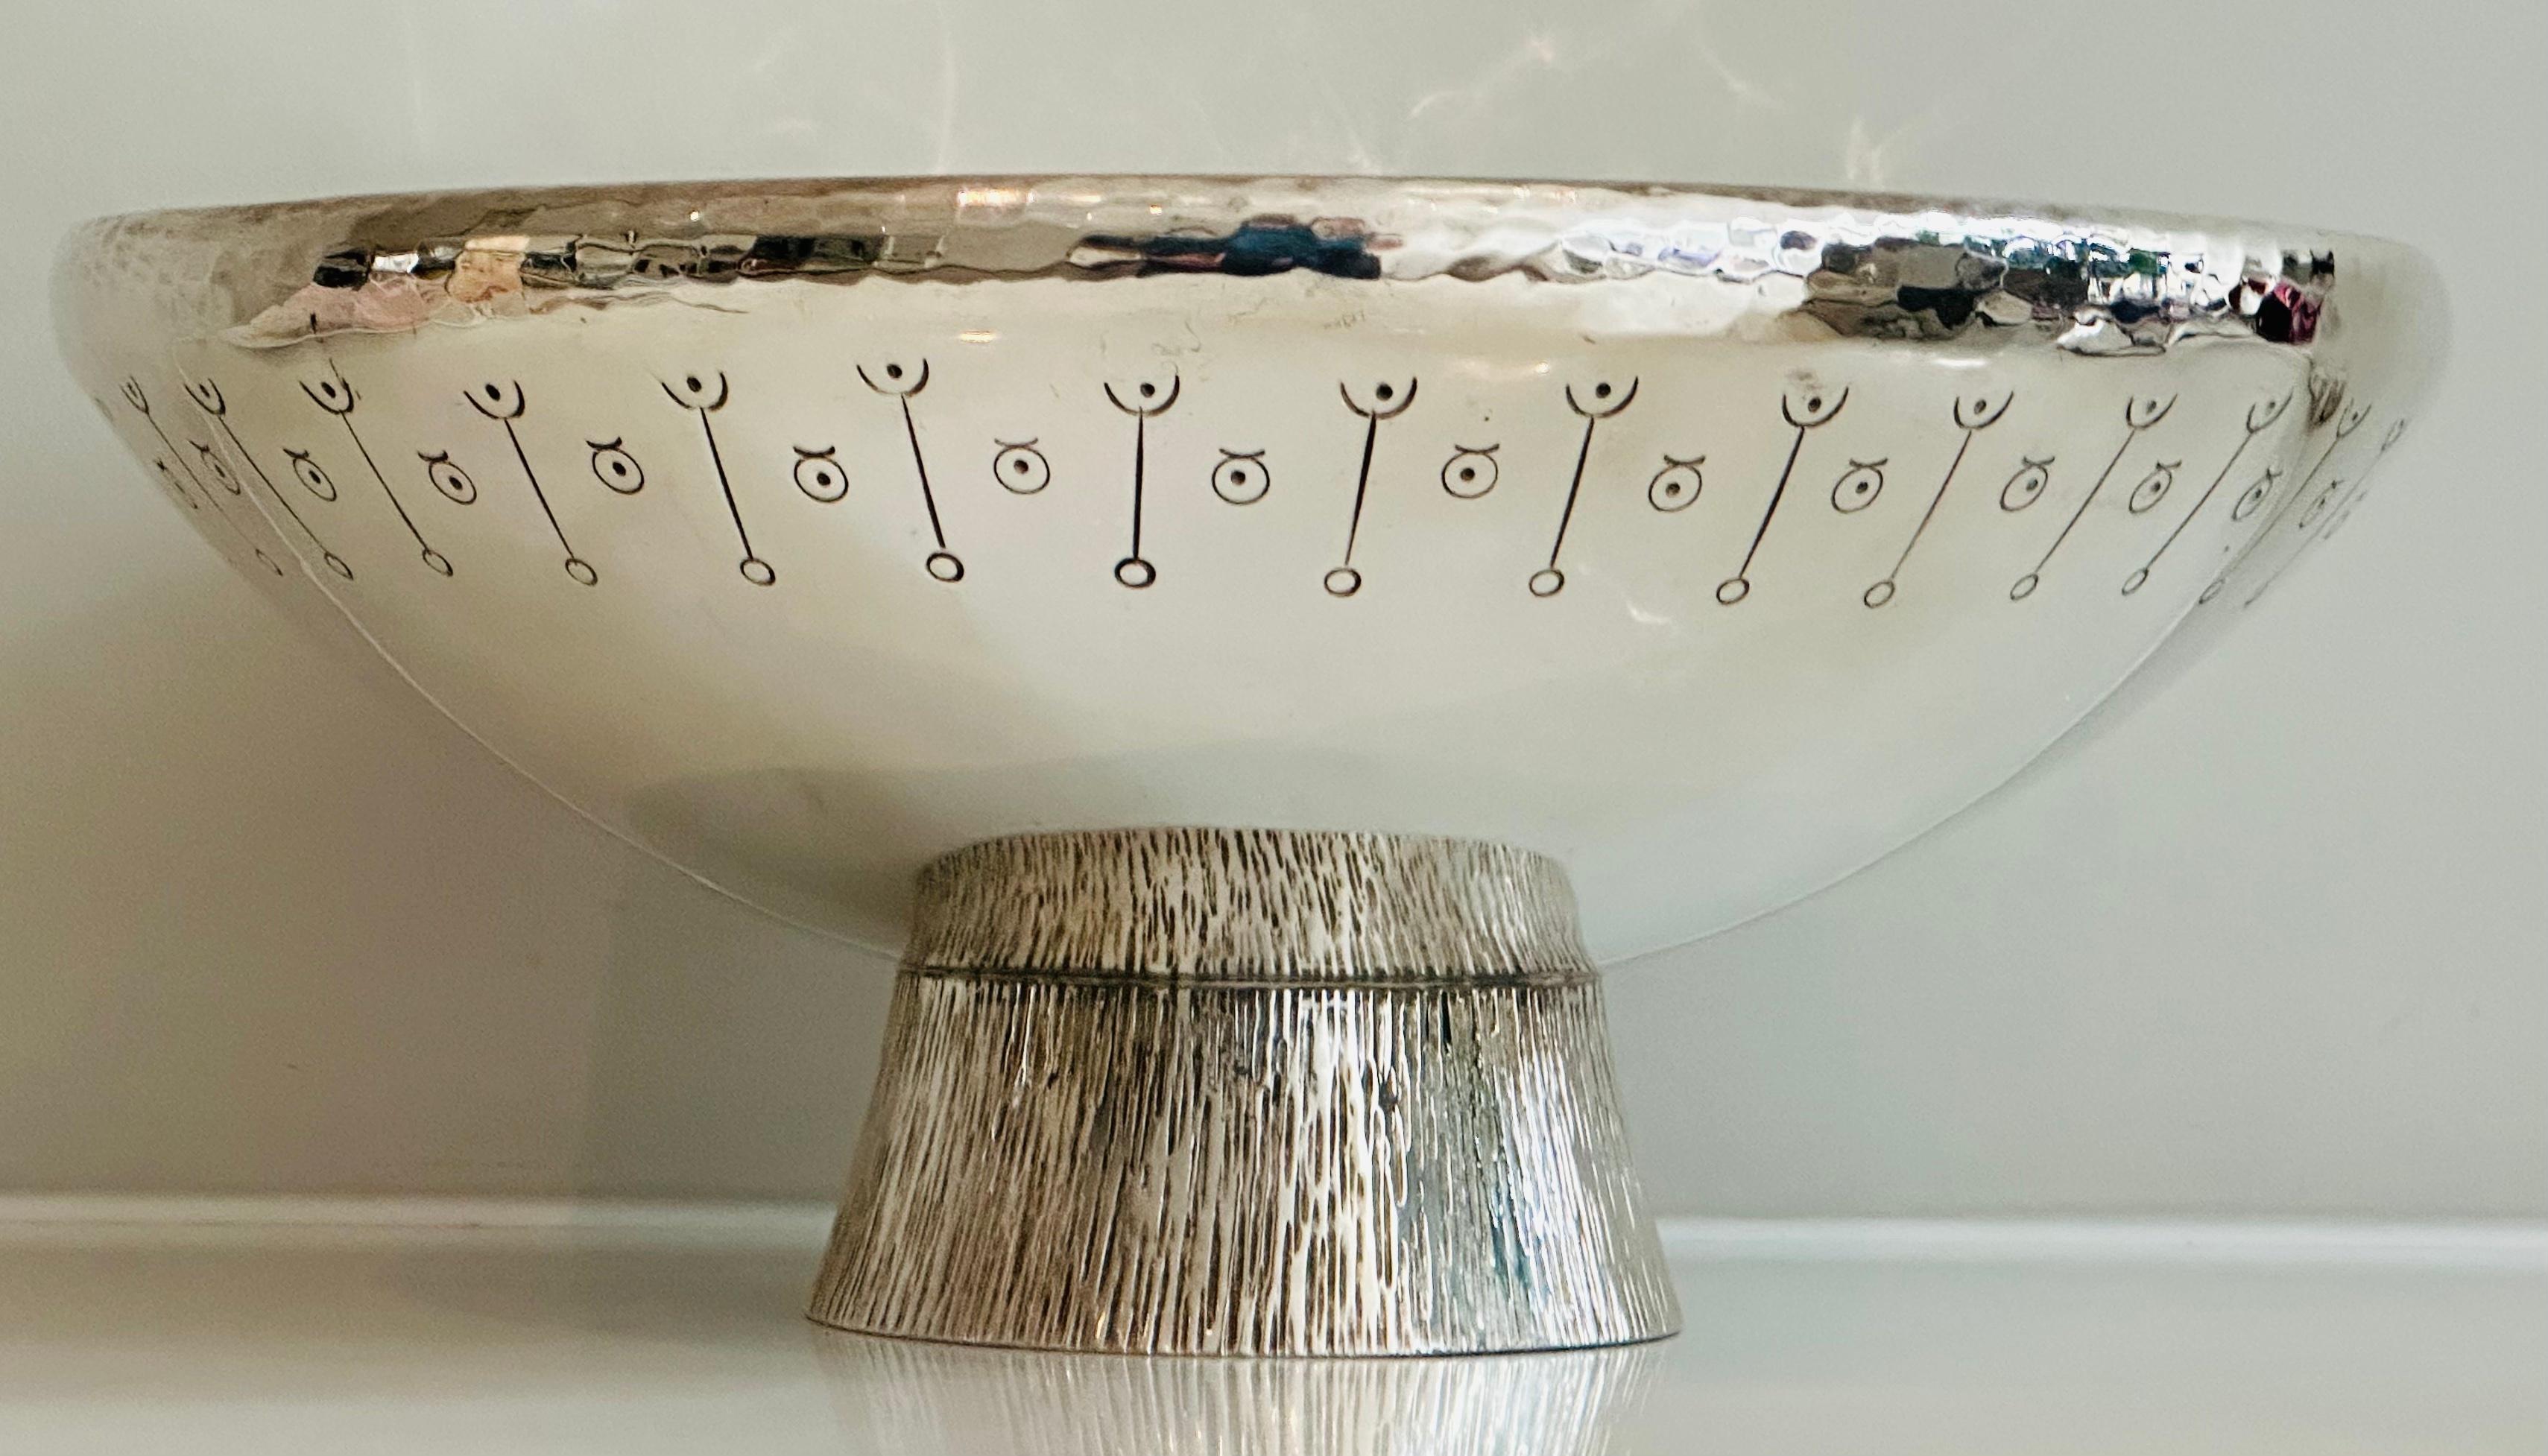 1980s English modernist silver-plated decorative serving or display bowl with an interesting simple 'eye' design incised around the outside. The slight conical base has a vertical incised pattern providing both stability and additional interest to